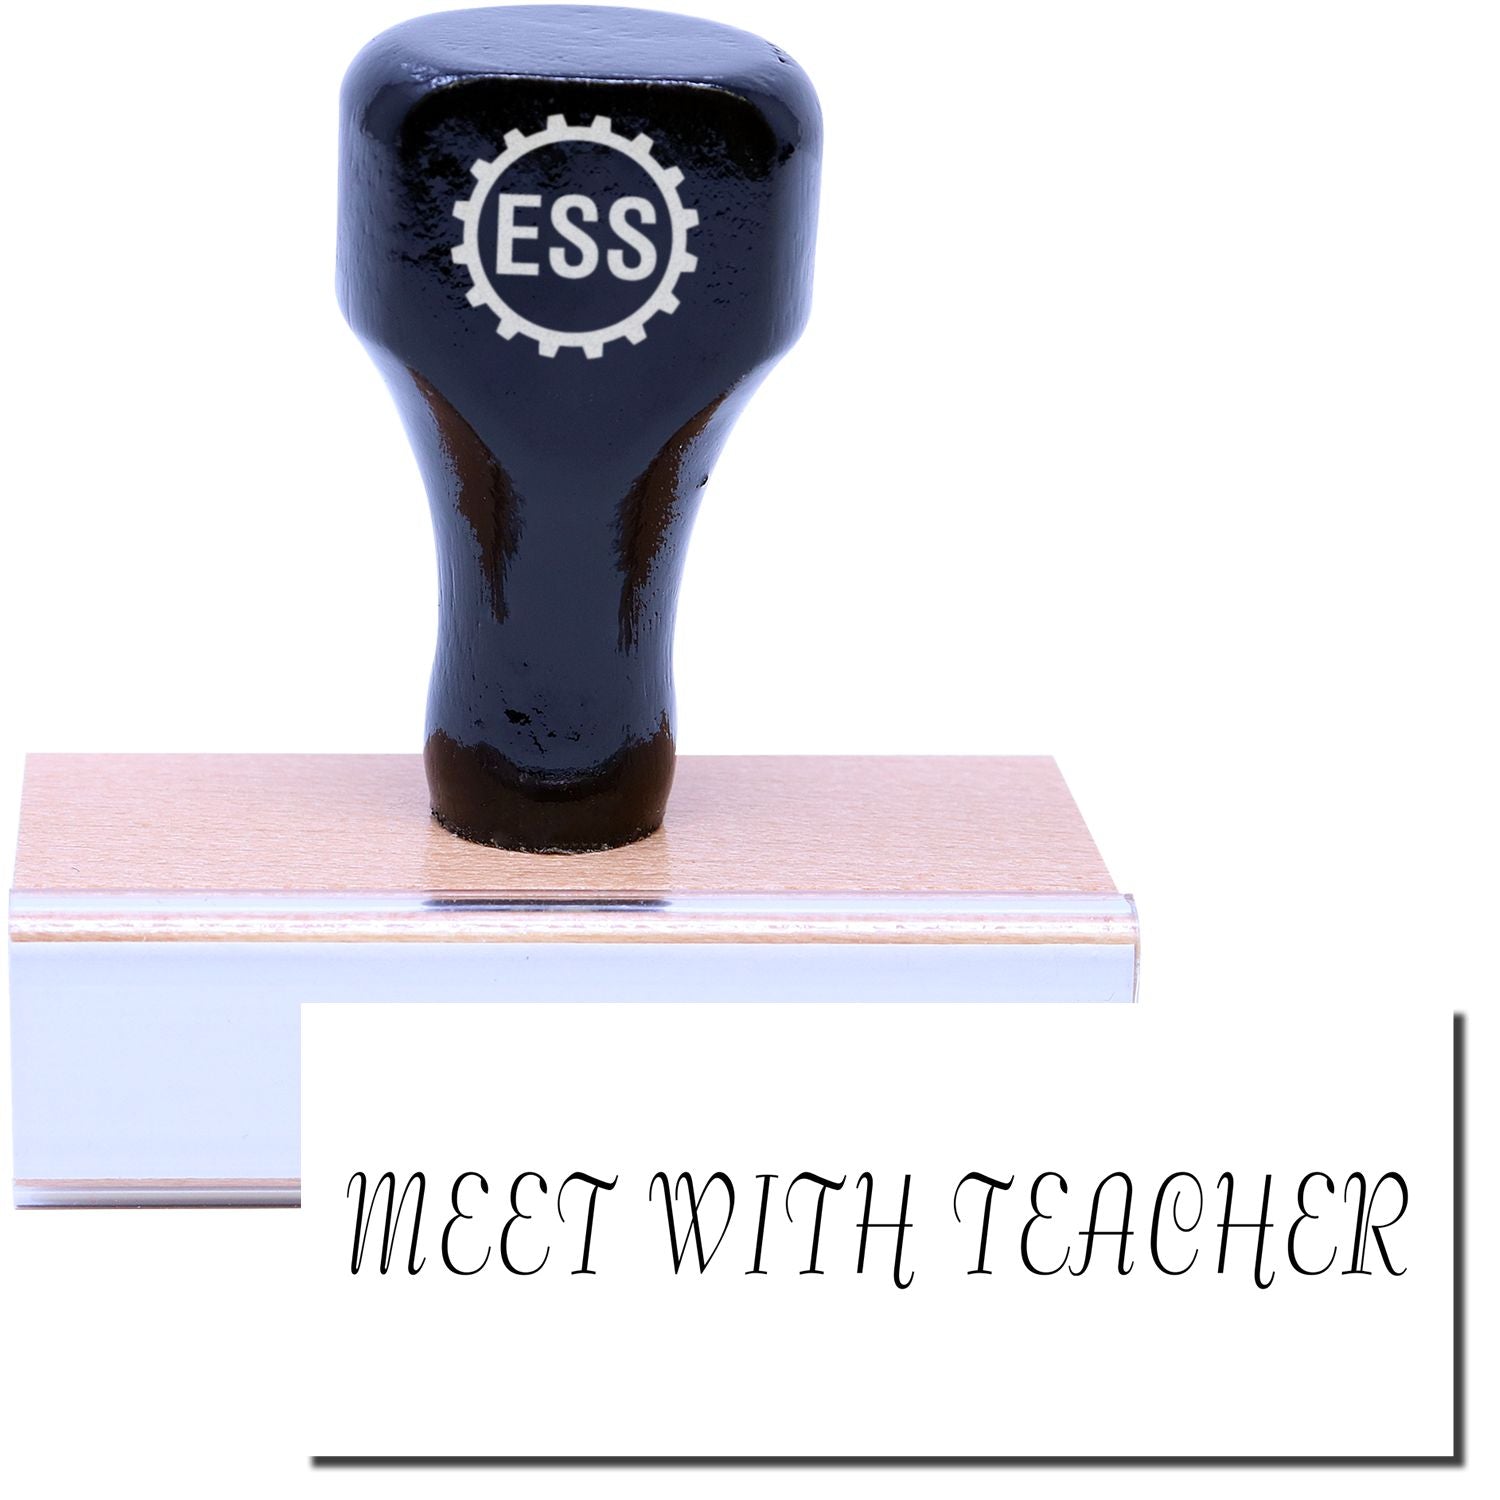 A stock office rubber stamp with a stamped image showing how the text "MEET WITH TEACHER" is displayed after stamping.